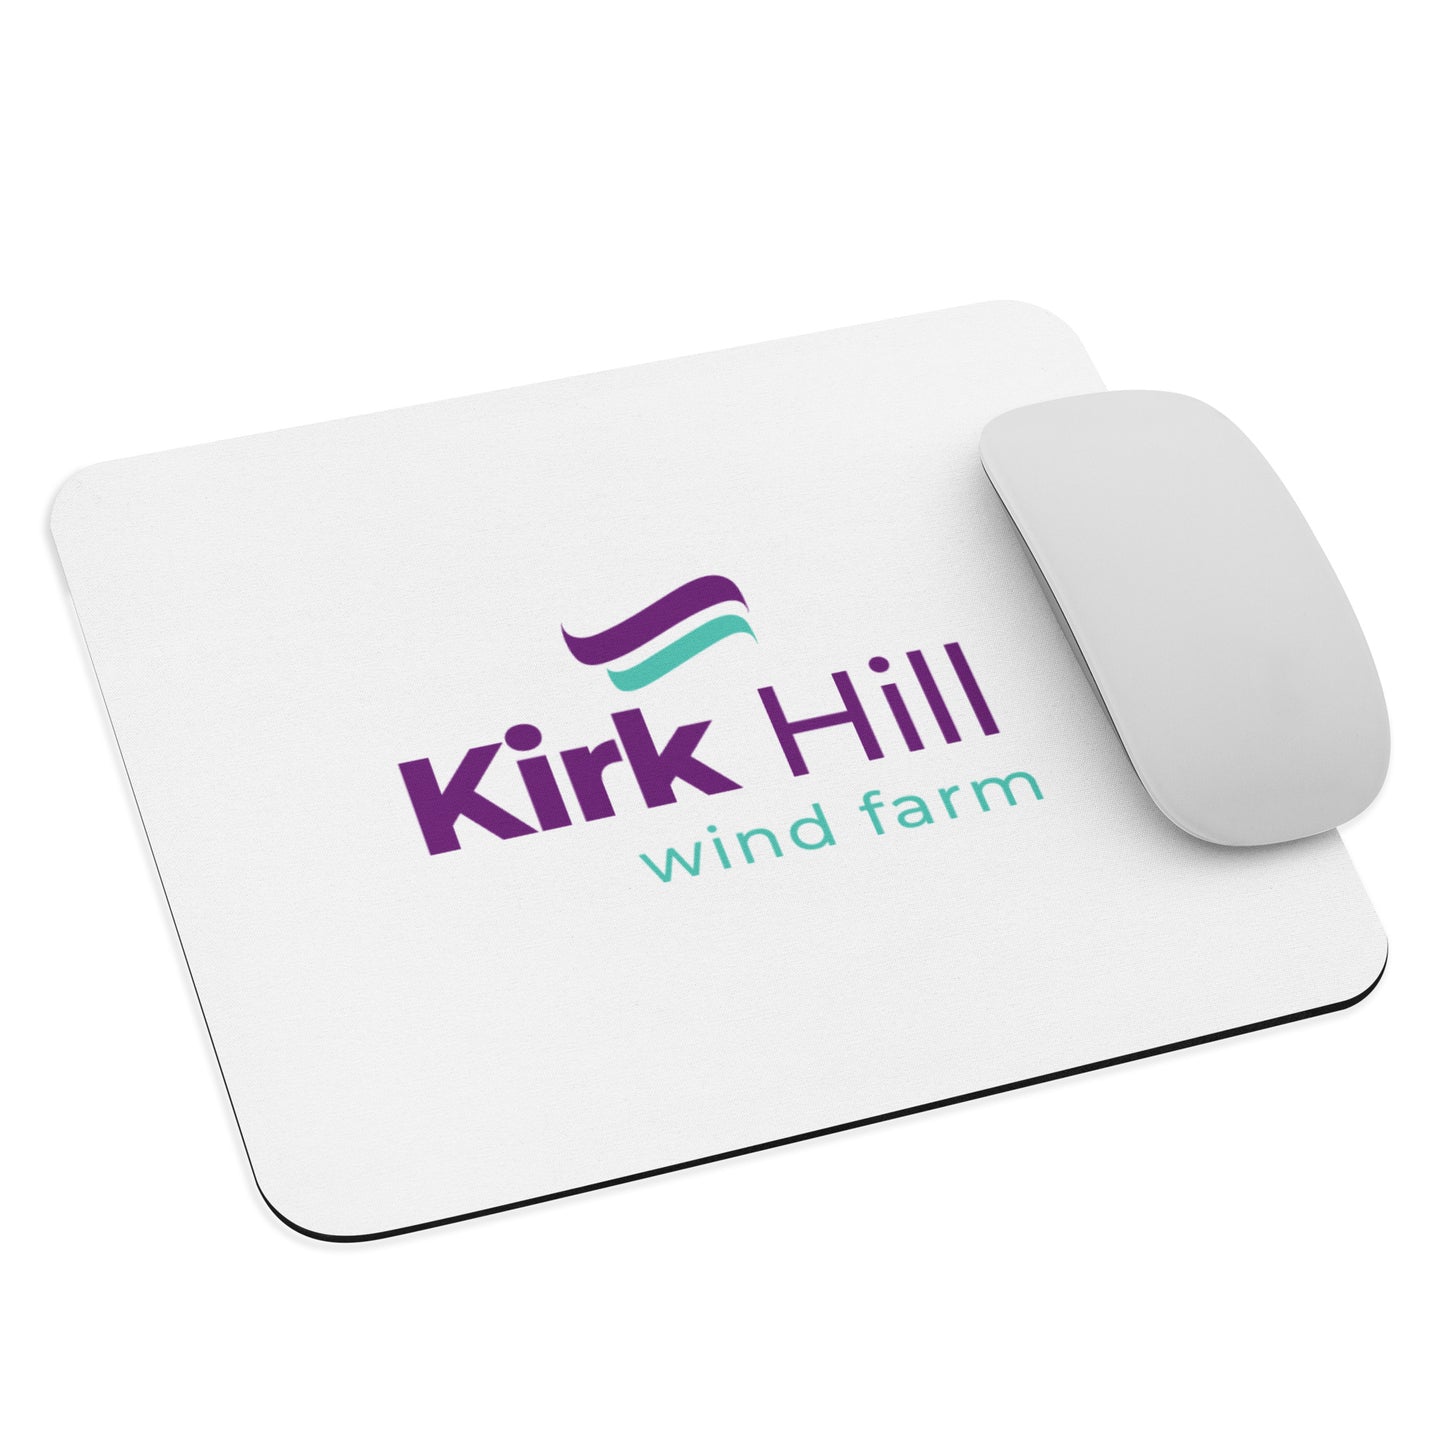 Kirk Hill mouse pad